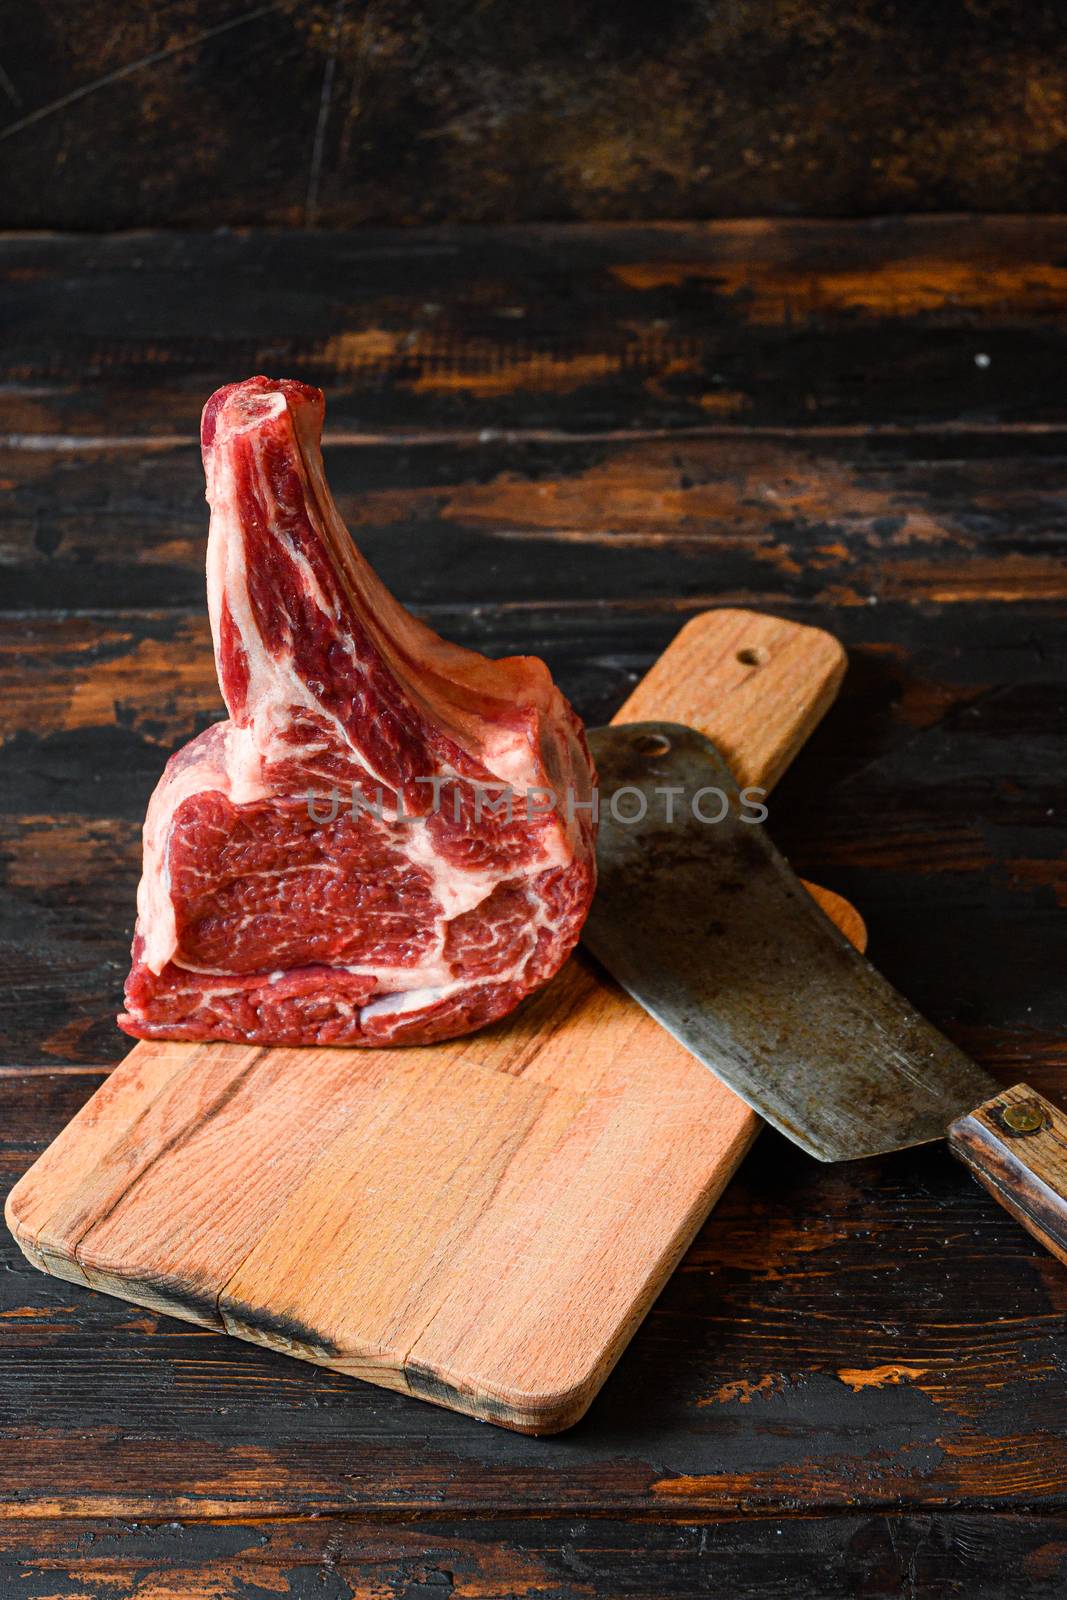 Raw Dallas black angus or spencer marbled steak in butchery side view over choping board with old american cleaver rustic old cutting board with dark planks by Ilianesolenyi